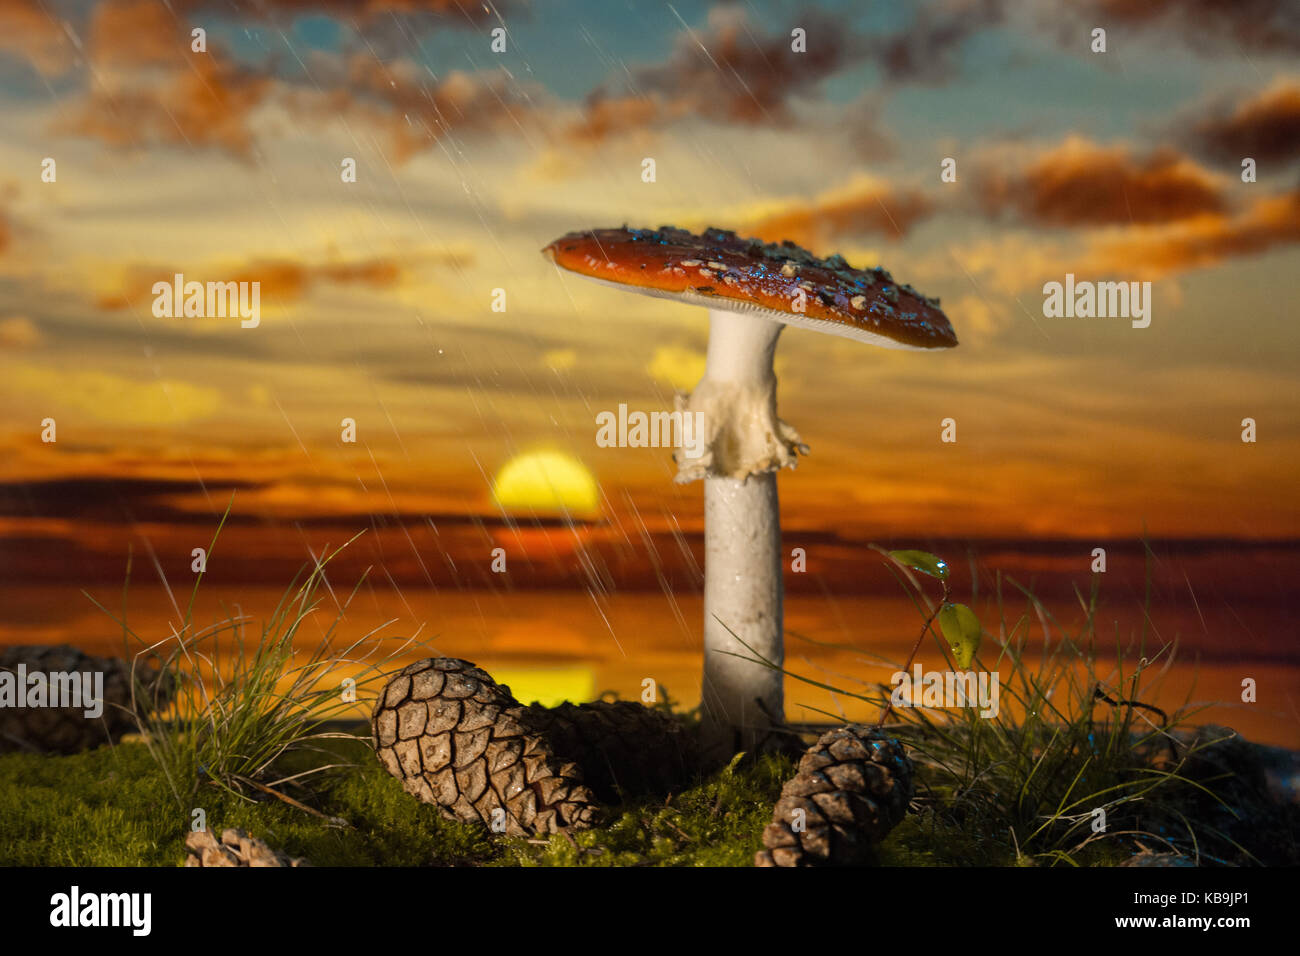 Poisonous mushroom with cones on the moss at sunset Stock Photo